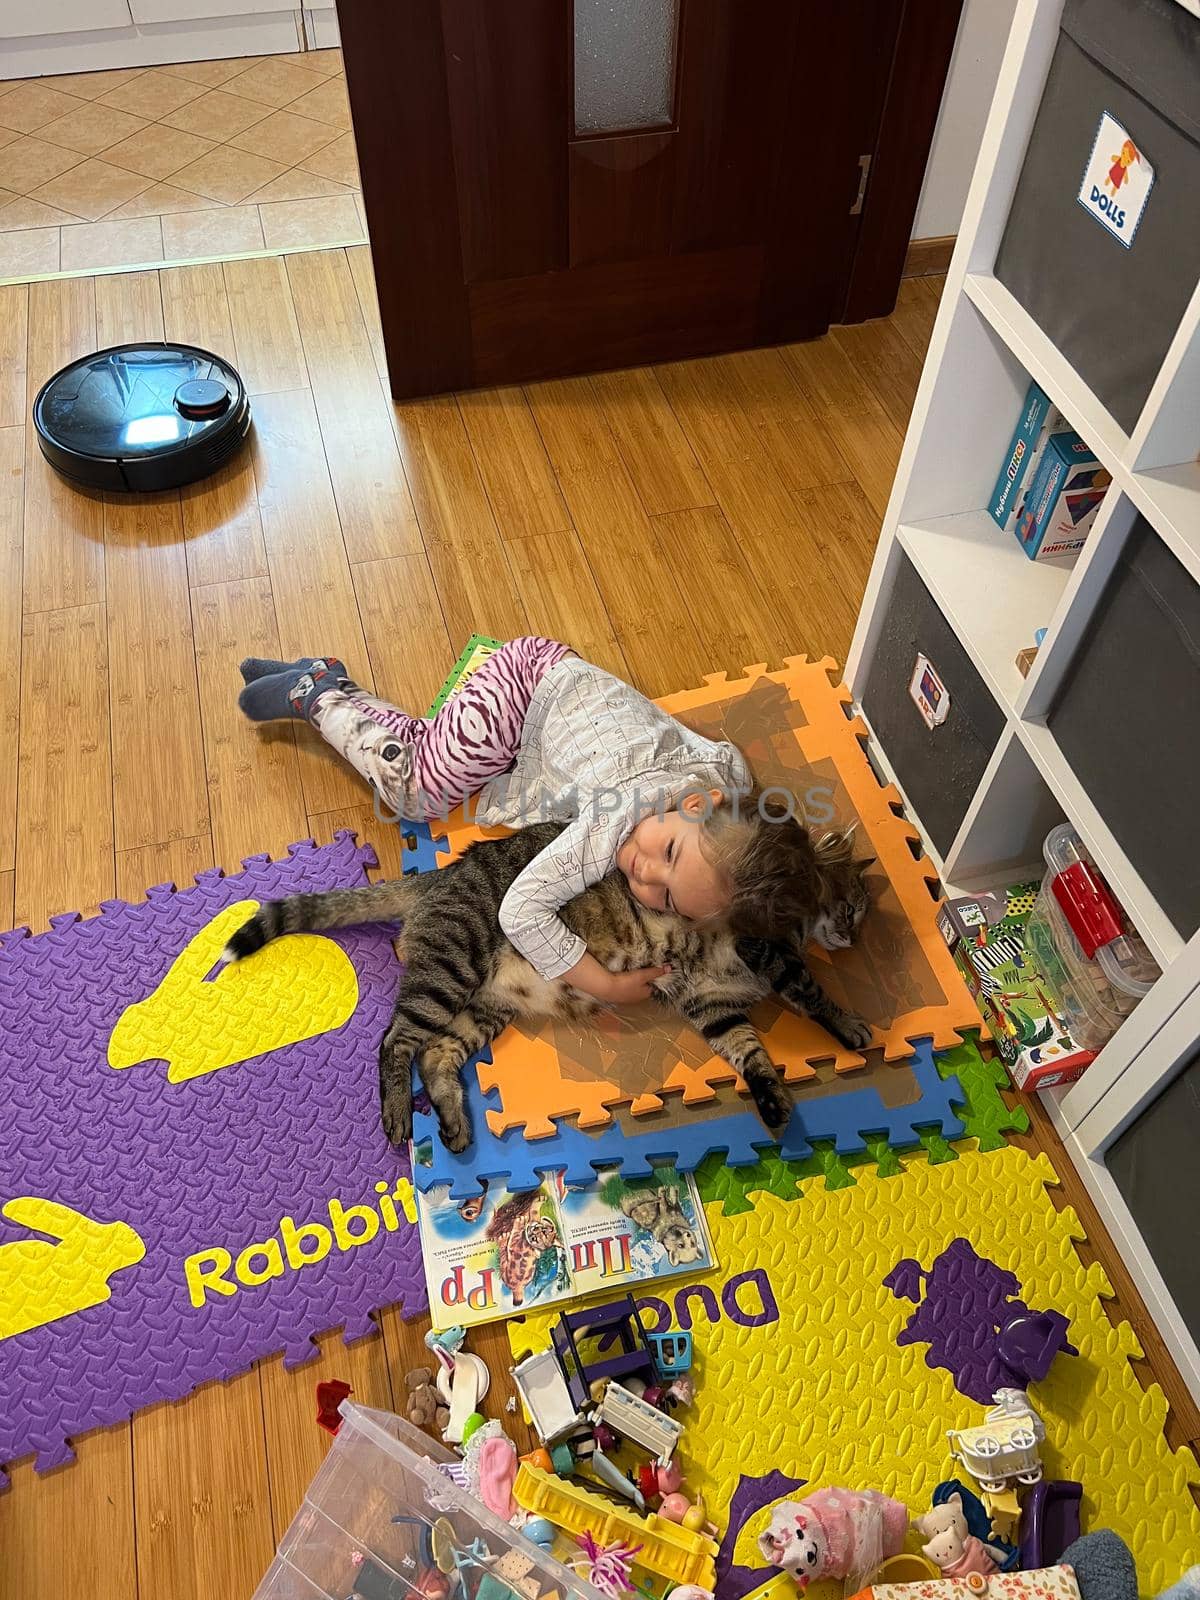 Little girl lies hugging a cat on a play mat by Nadtochiy